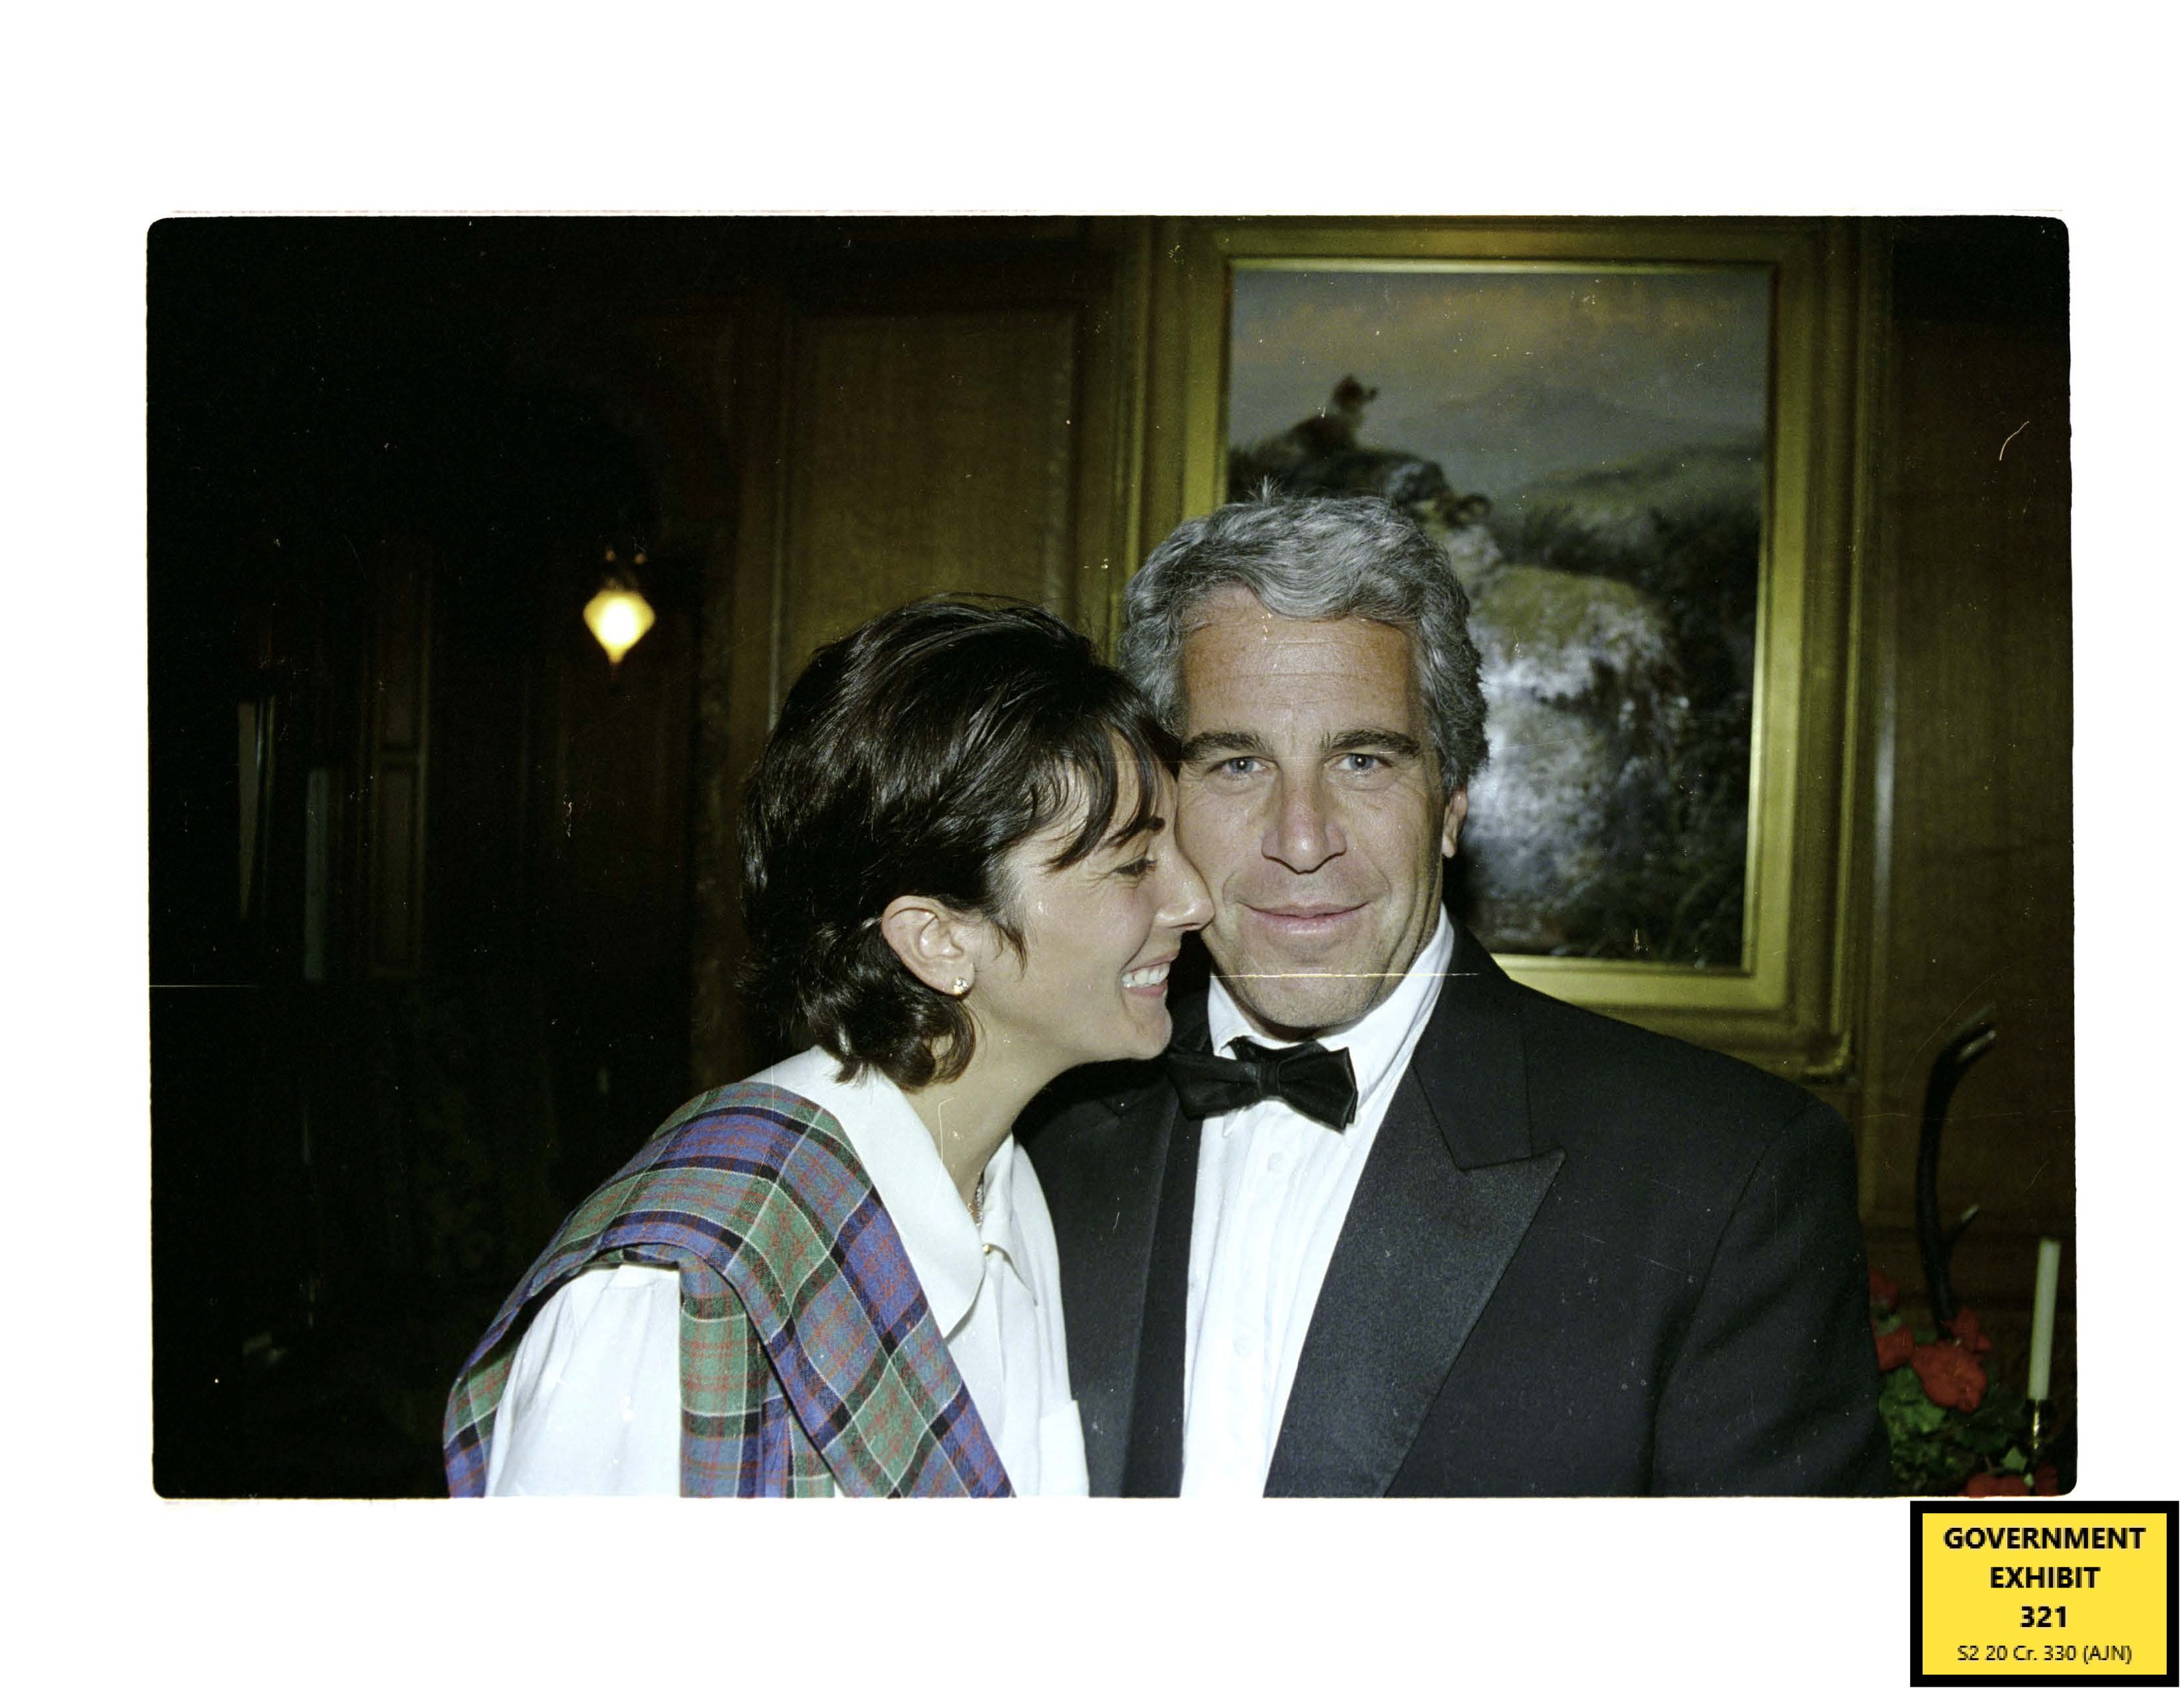 Maxwell was convicted of abusing young girls over decades with the late paedophile Jeffrey Epstein